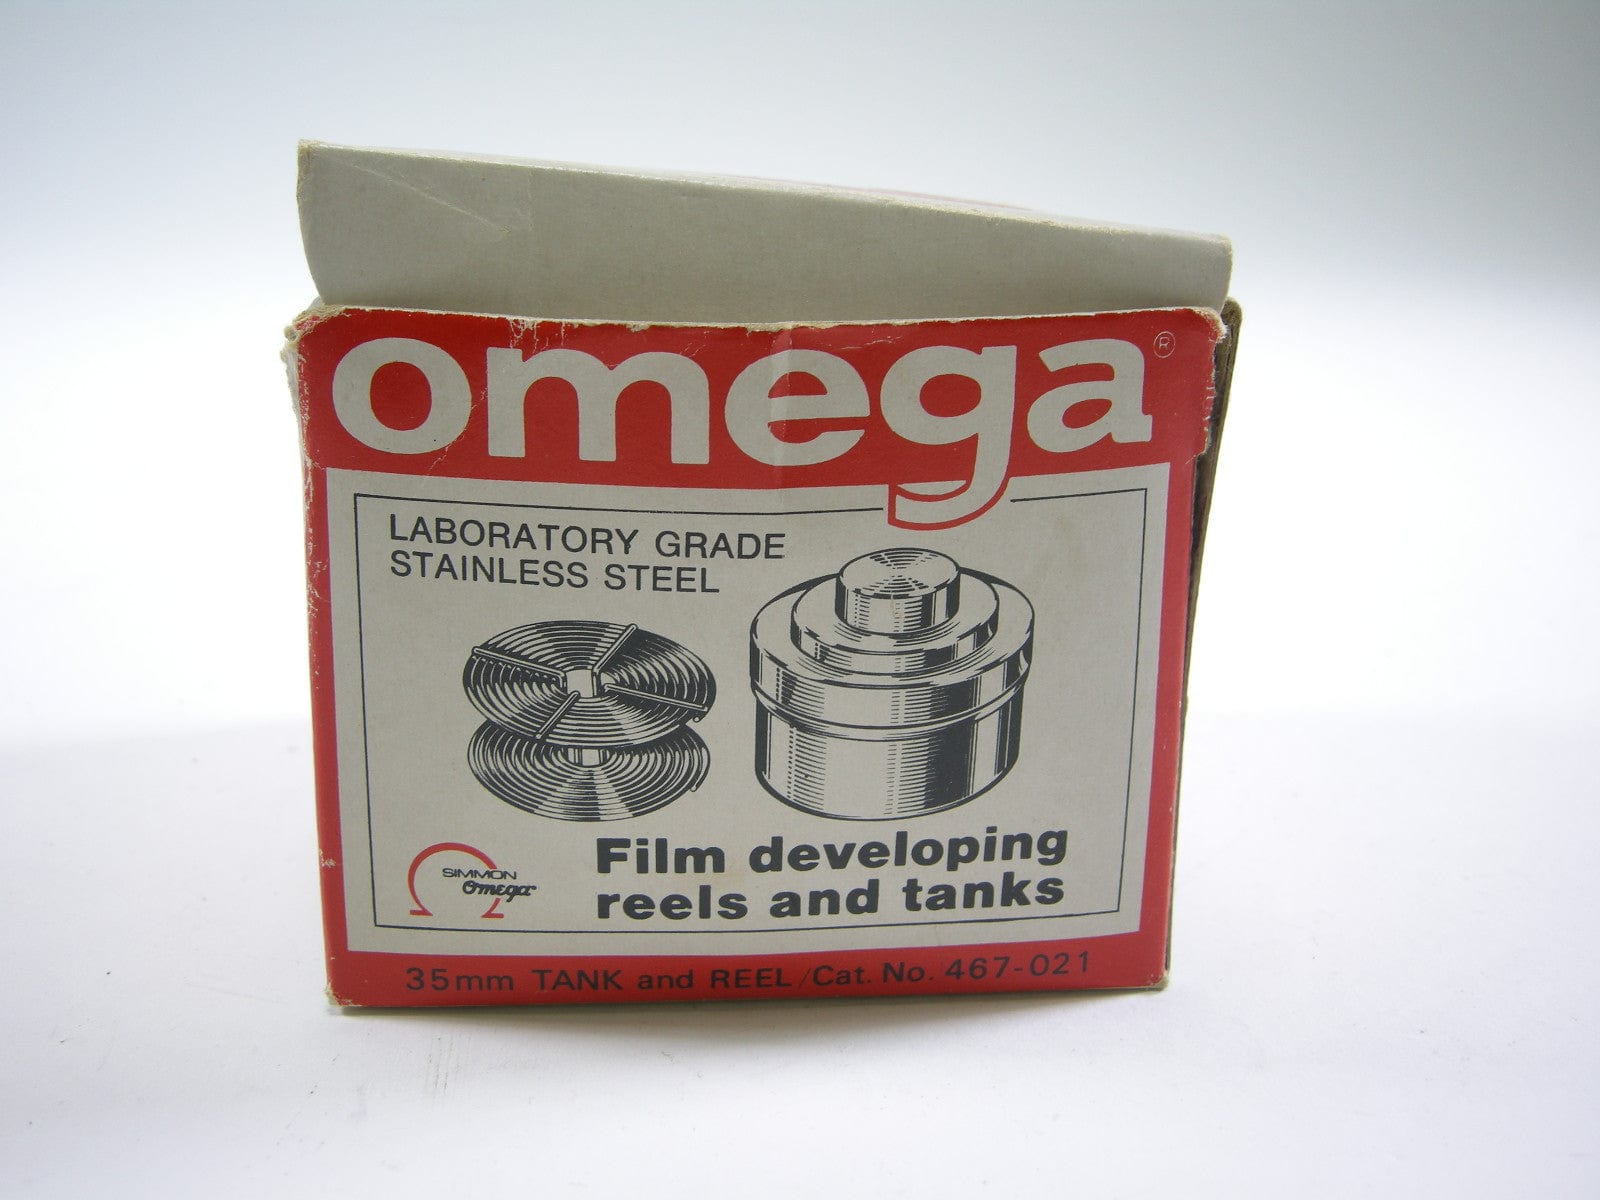 Omega Quick Fill Stainless Steel Film reel and tank